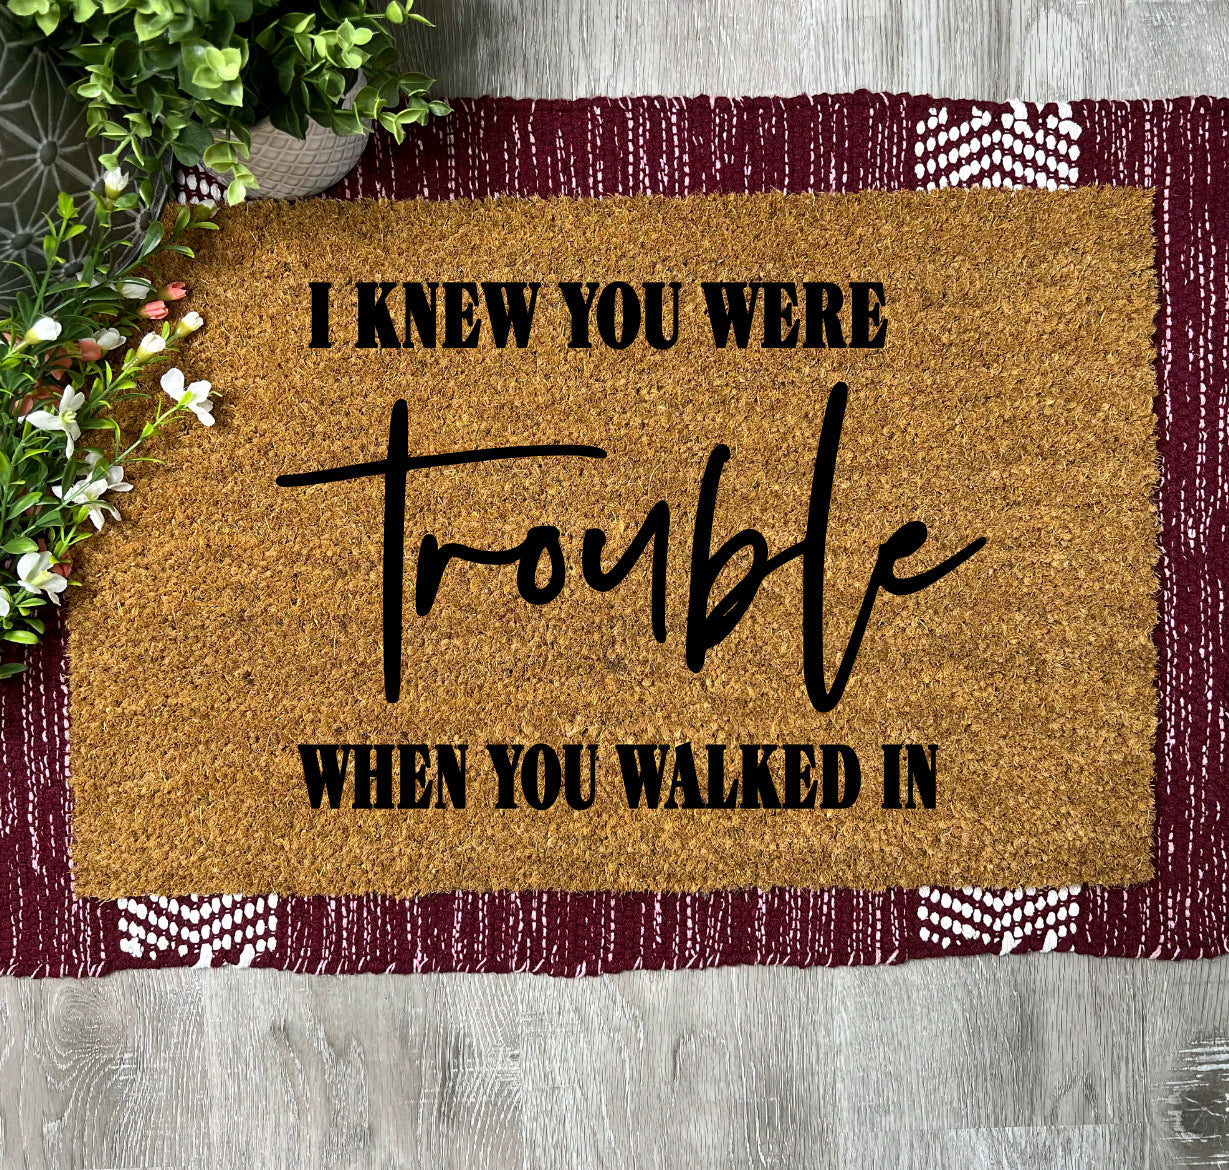 (Taylor Swift) I Knew You Were Trouble